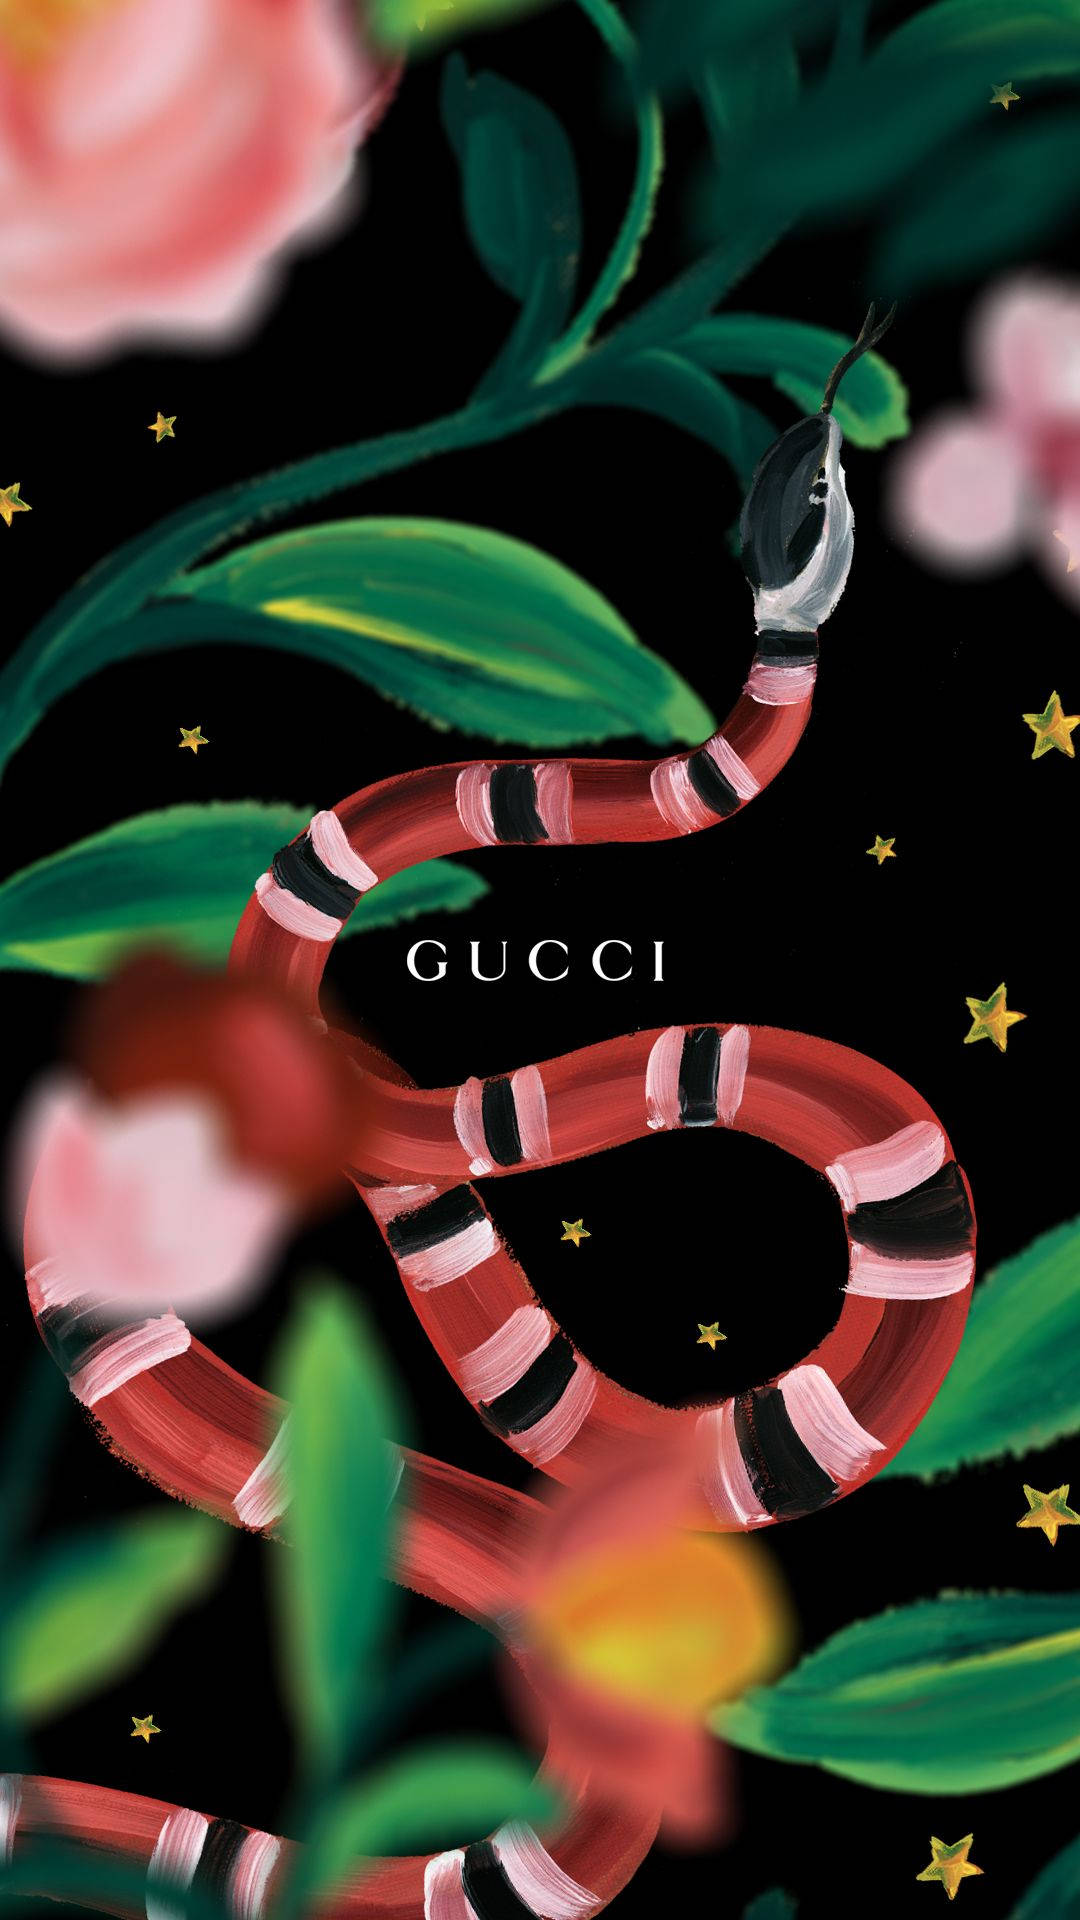 Gucci 1080X1920 Wallpaper and Background Image